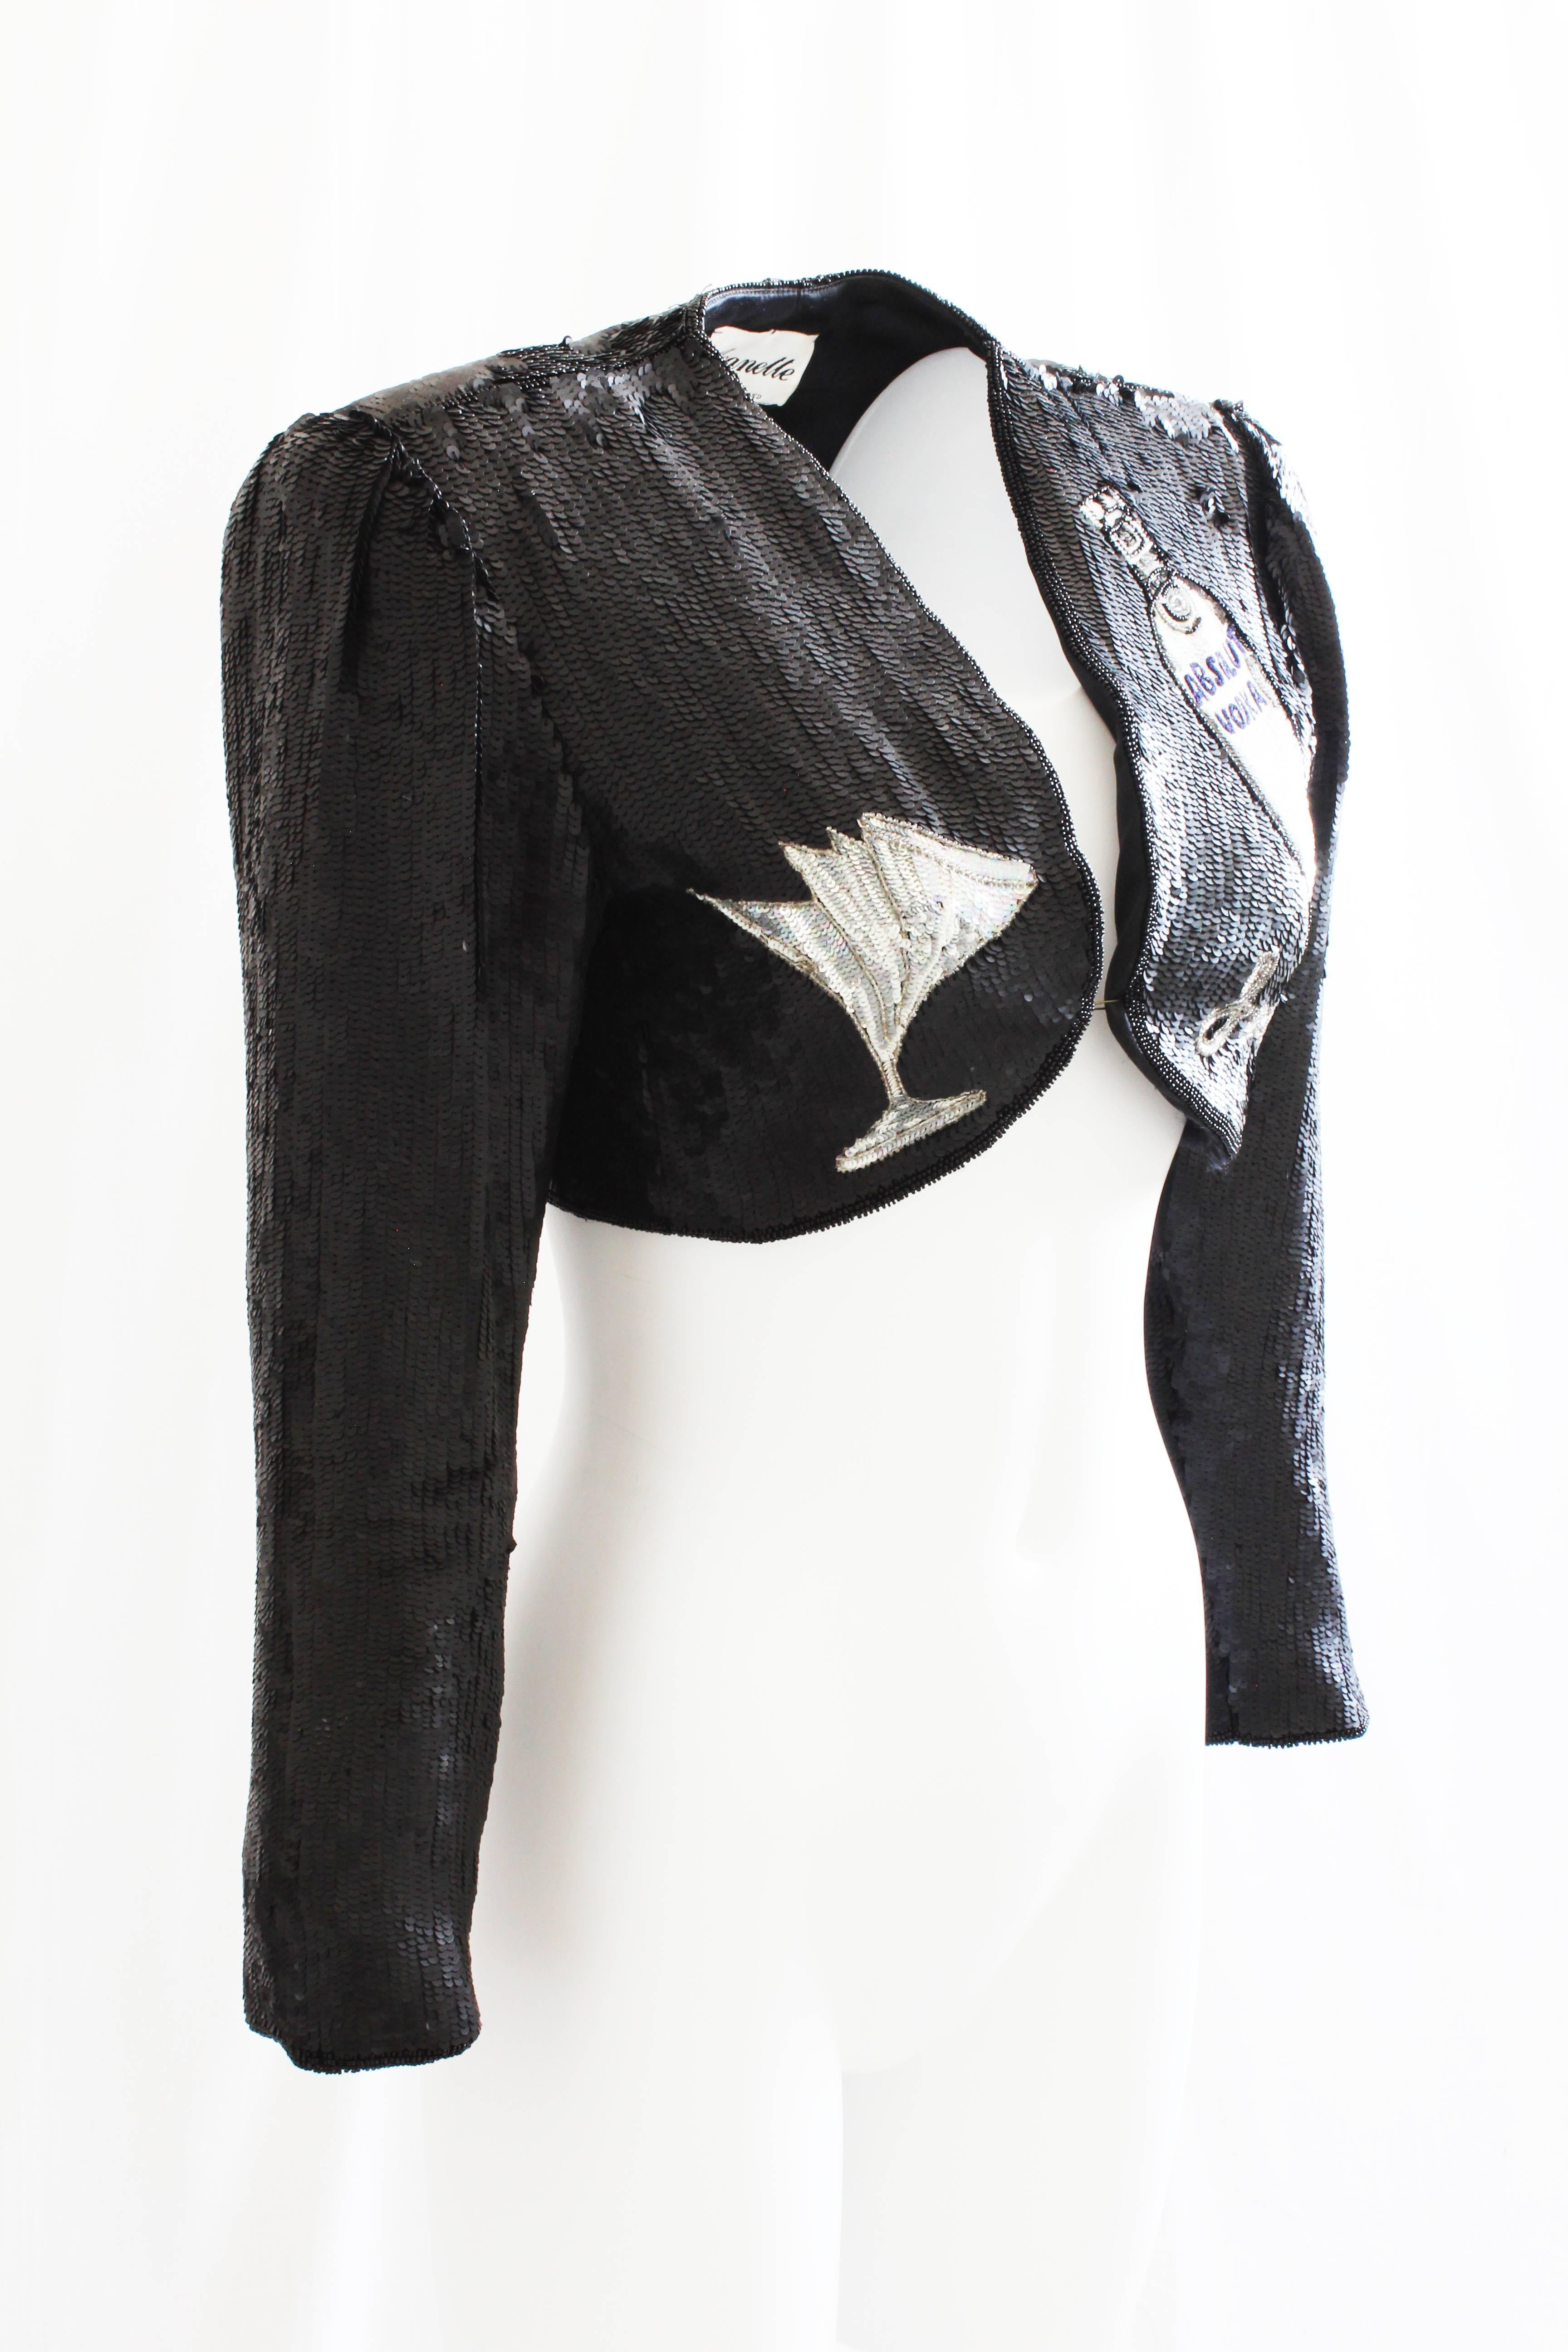 Jeanette Kastenberg Cropped Jacket Limited Edition Absolut Vodka Sequins M 1990s In Good Condition In Port Saint Lucie, FL